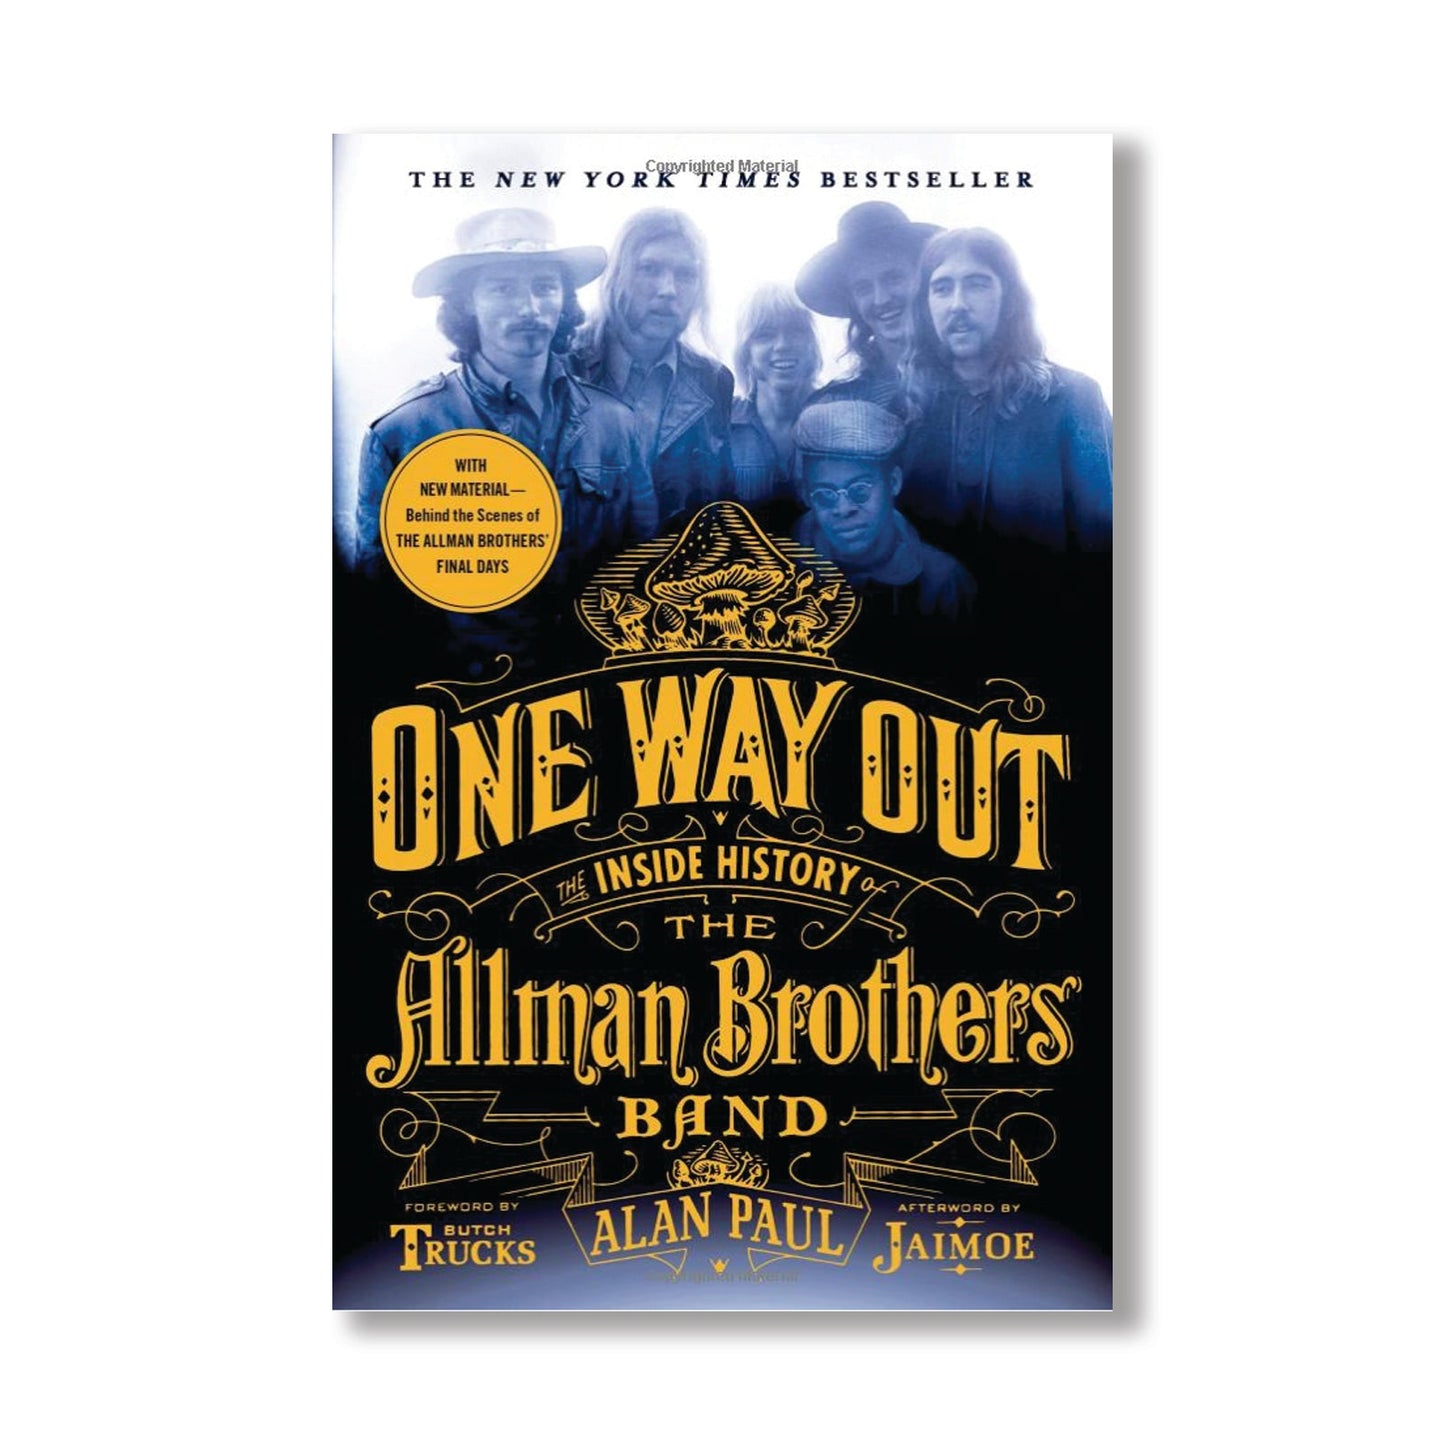 One Way Out: The Inside History of the Allman Brothers Band Book